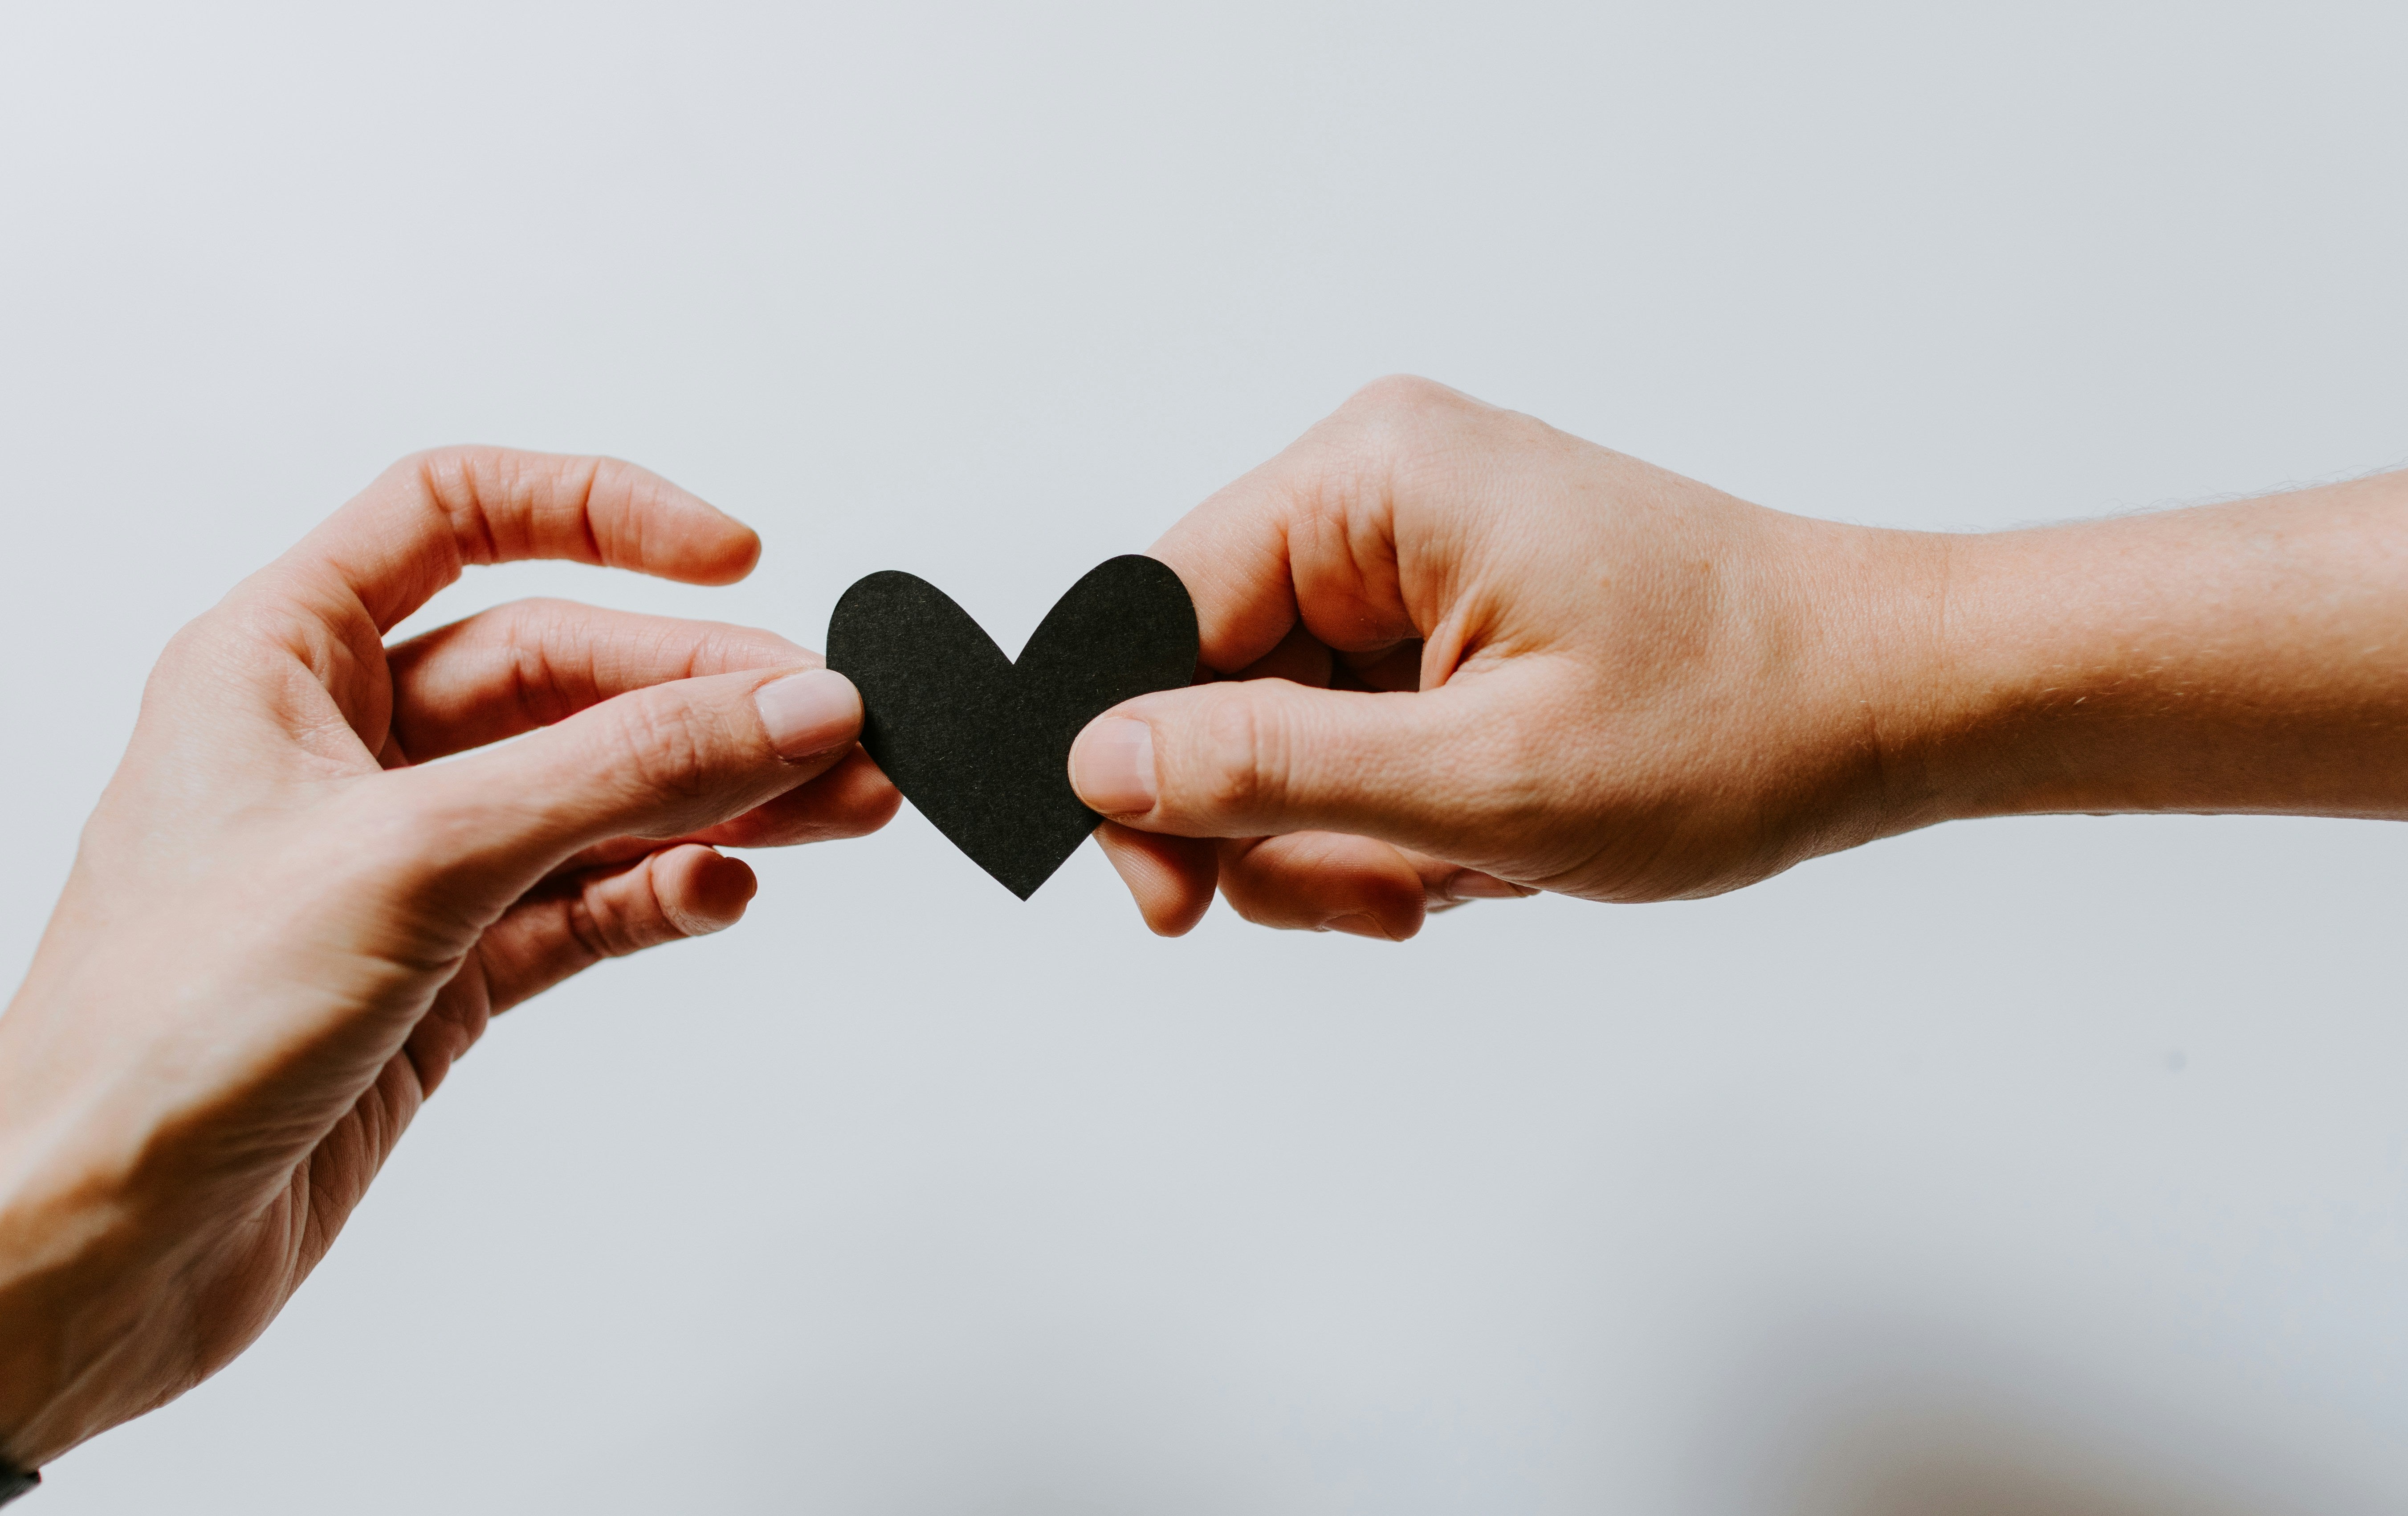 Two hands holding a paper heart.Photo by Kelly Sikkema on Unsplash